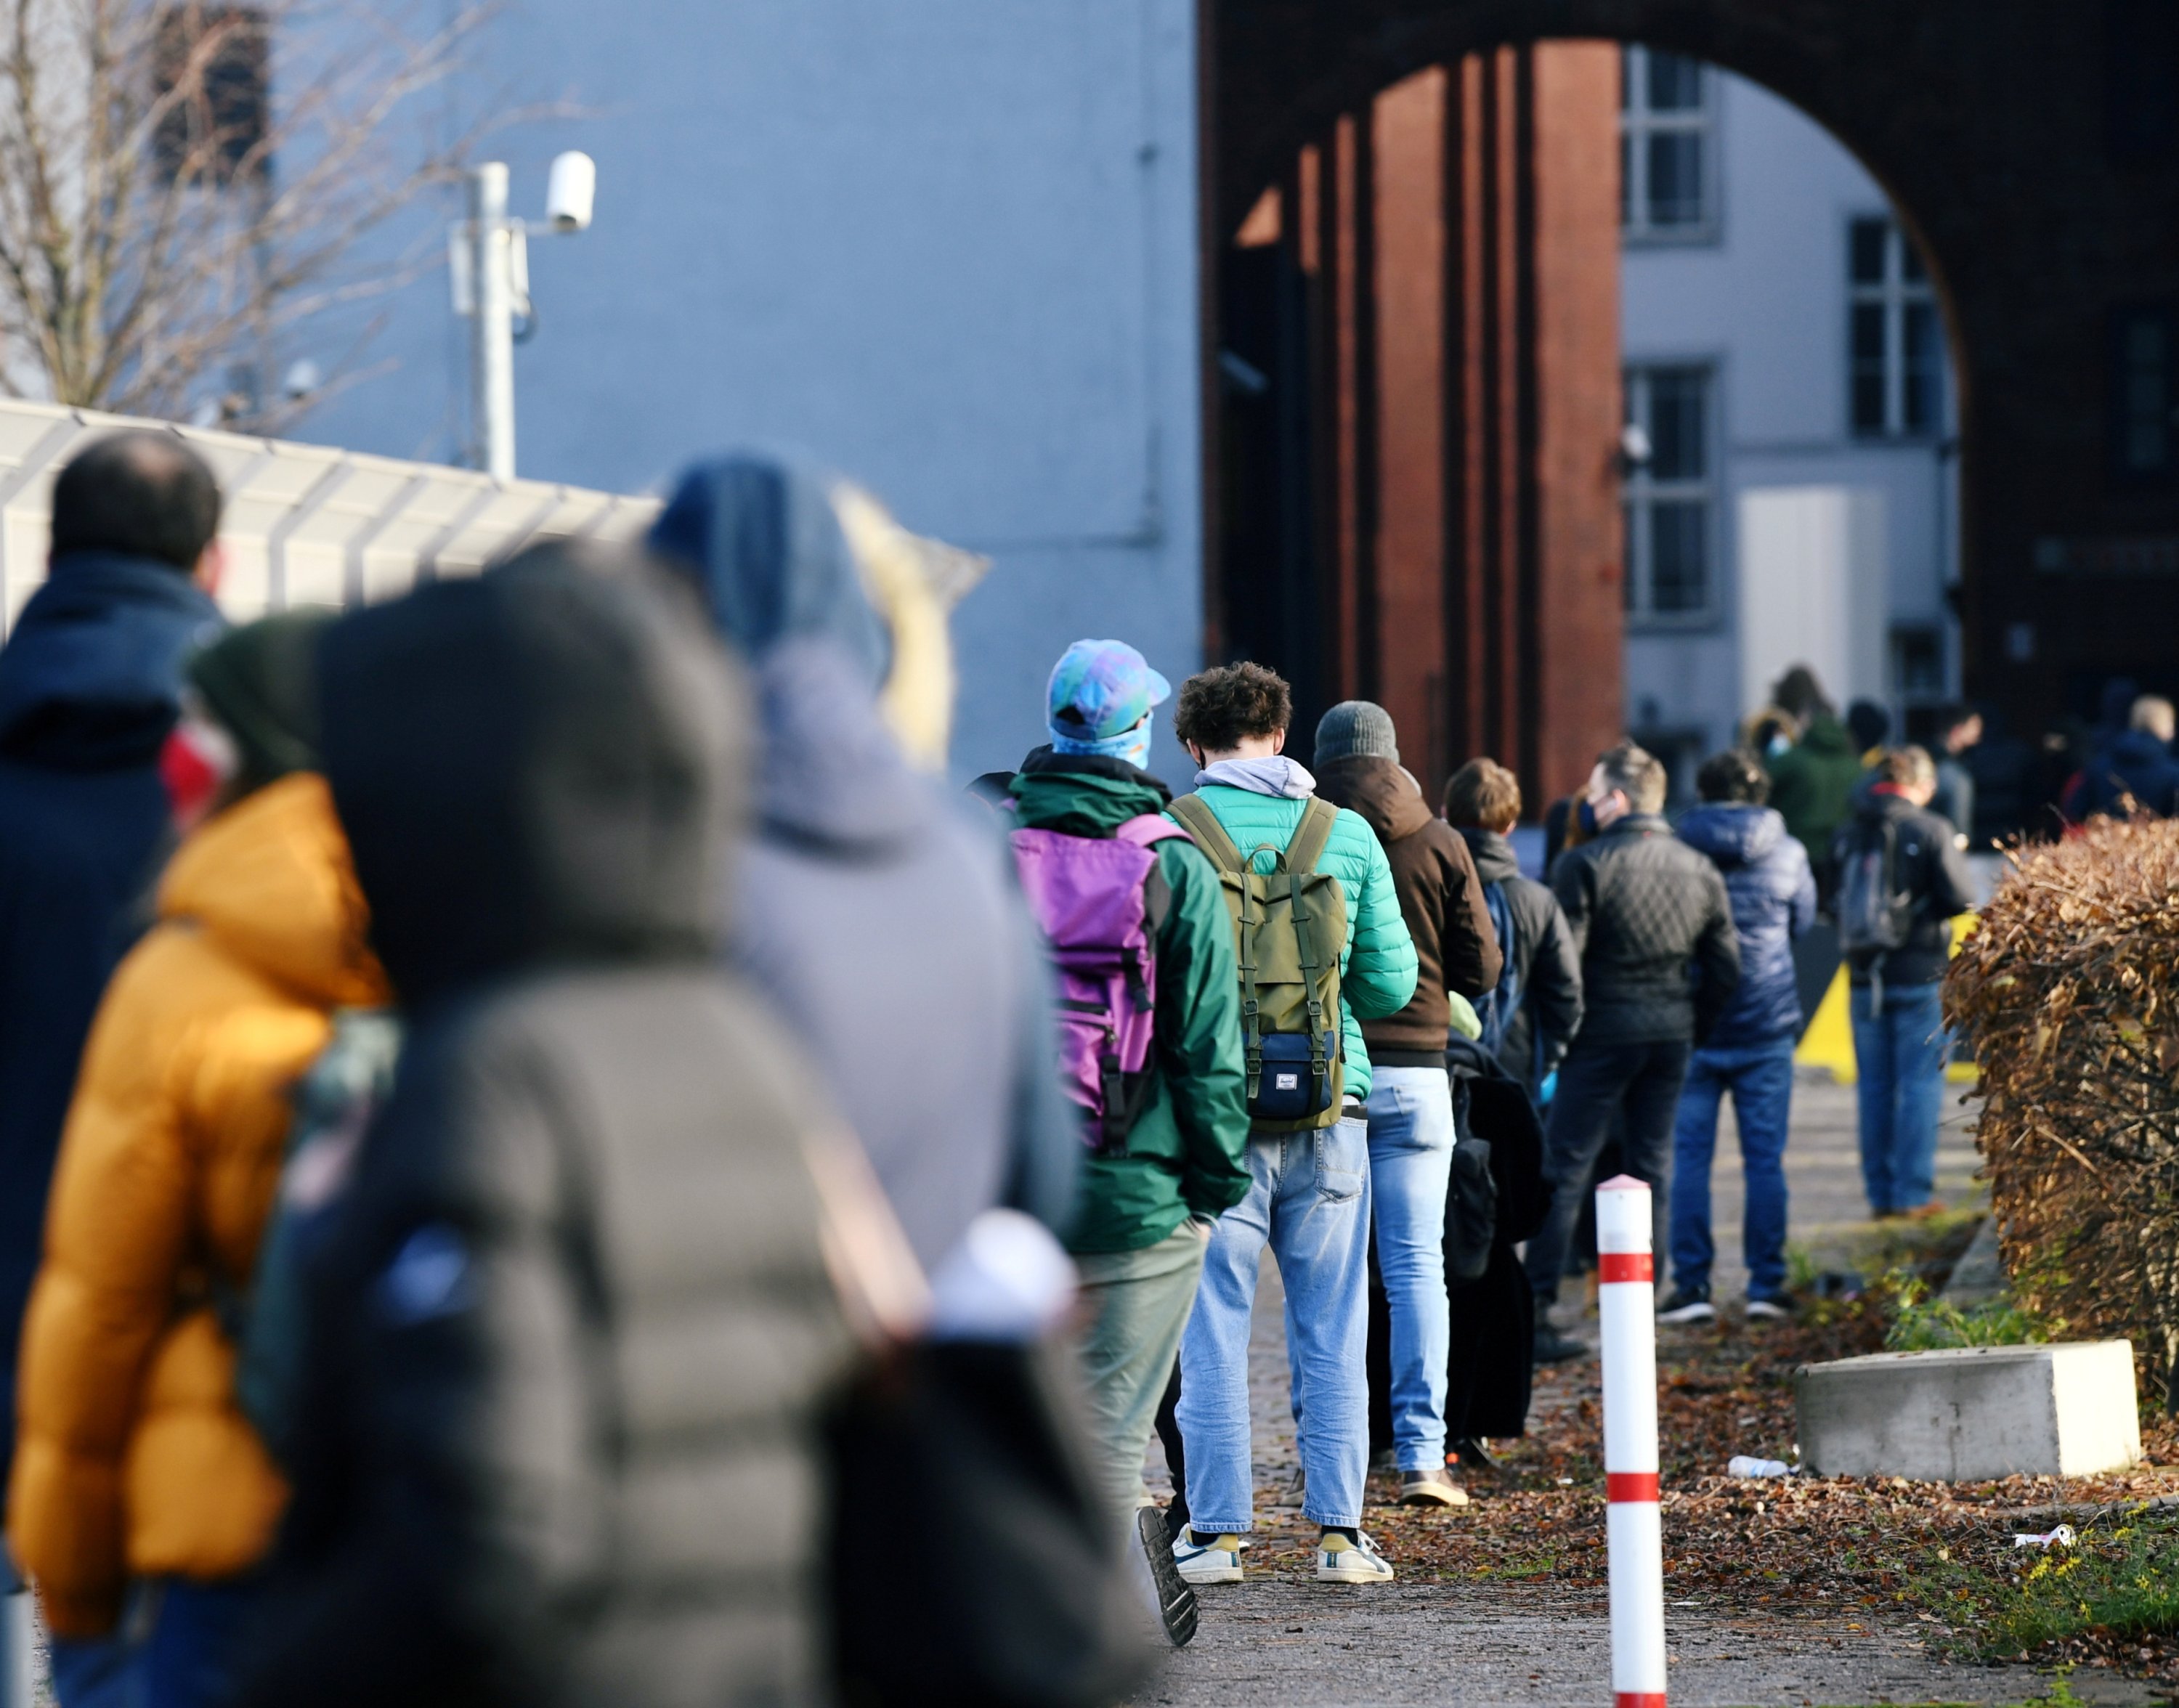 People queue at a walk-in COVID-19 testing center at Wilhelmstrasse, amid the COVID-19 pandemic, in Berlin, Germany, Dec. 18, 2020. (REUTERS Photo)